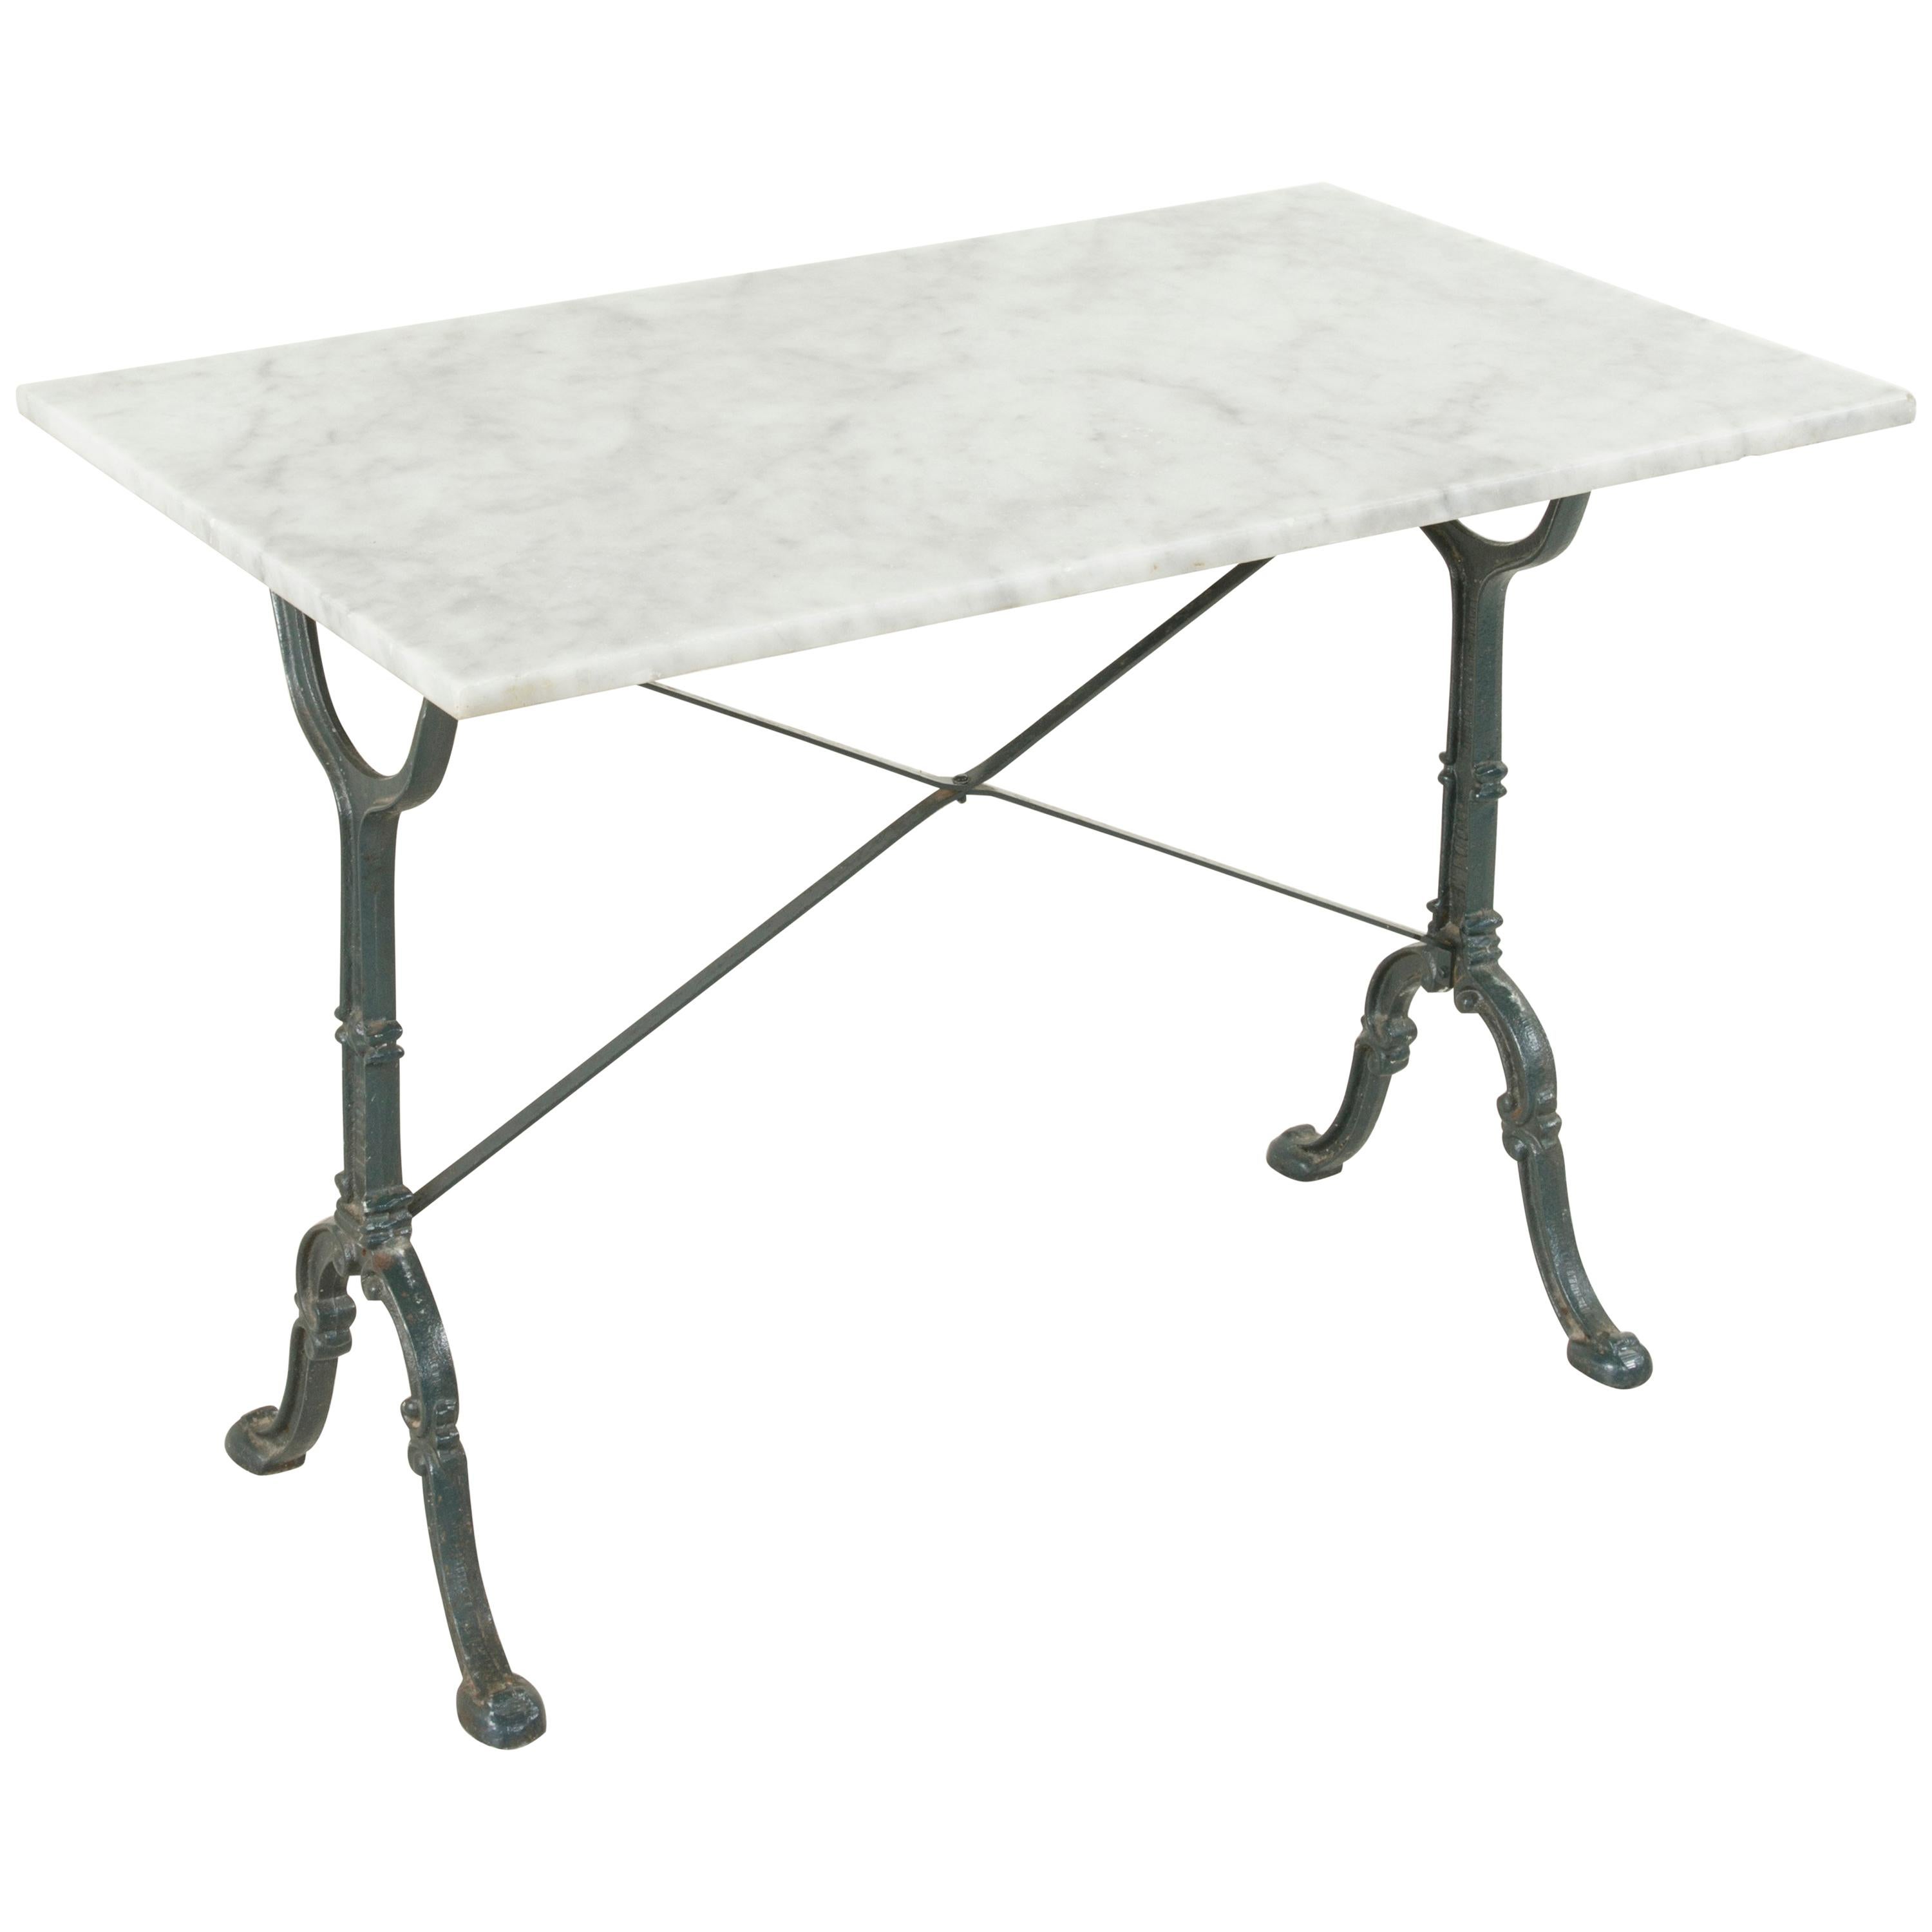 Early 20th Century French Iron Bistro Table with Maker's Name Godin, Marble Top